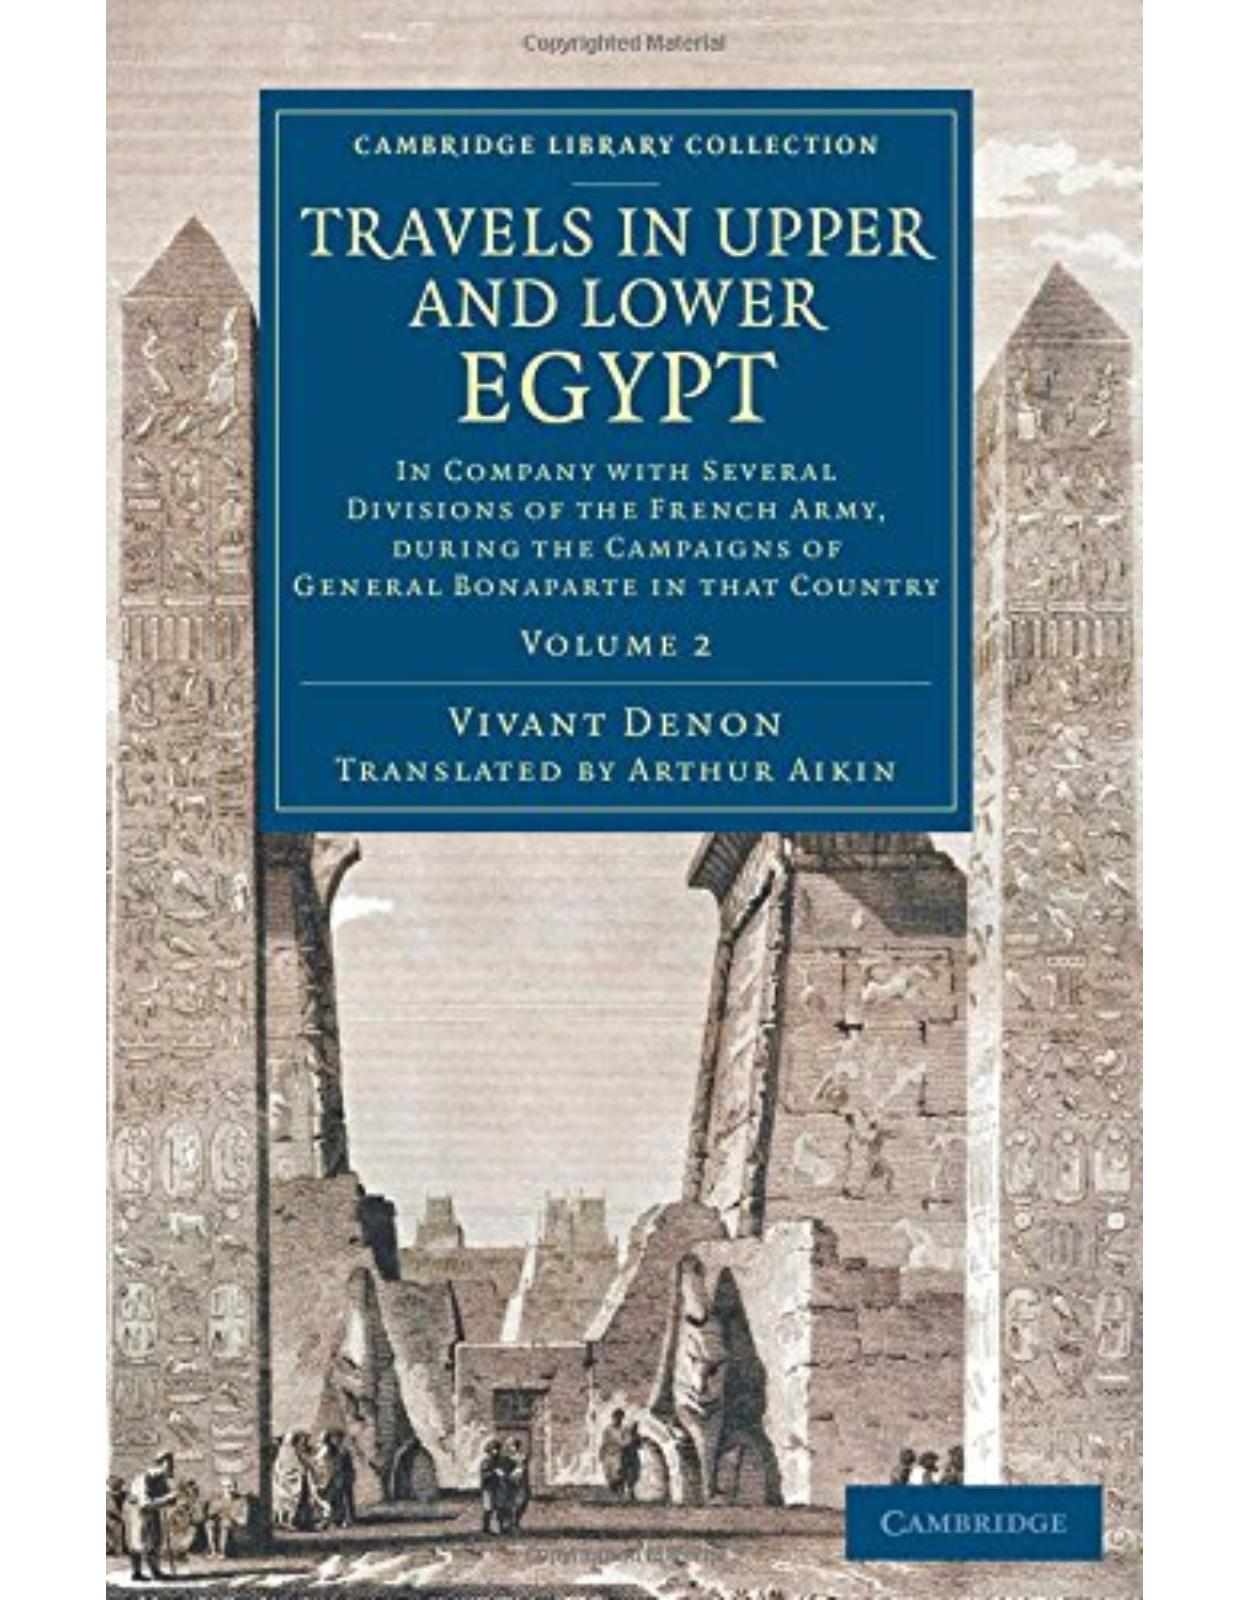 Travels in Upper and Lower Egypt: In Company with Several Divisions of the French Army, during the Campaigns of General Bonaparte in that Country: Volume 2 (Cambridge Library Collection - Egyptology)